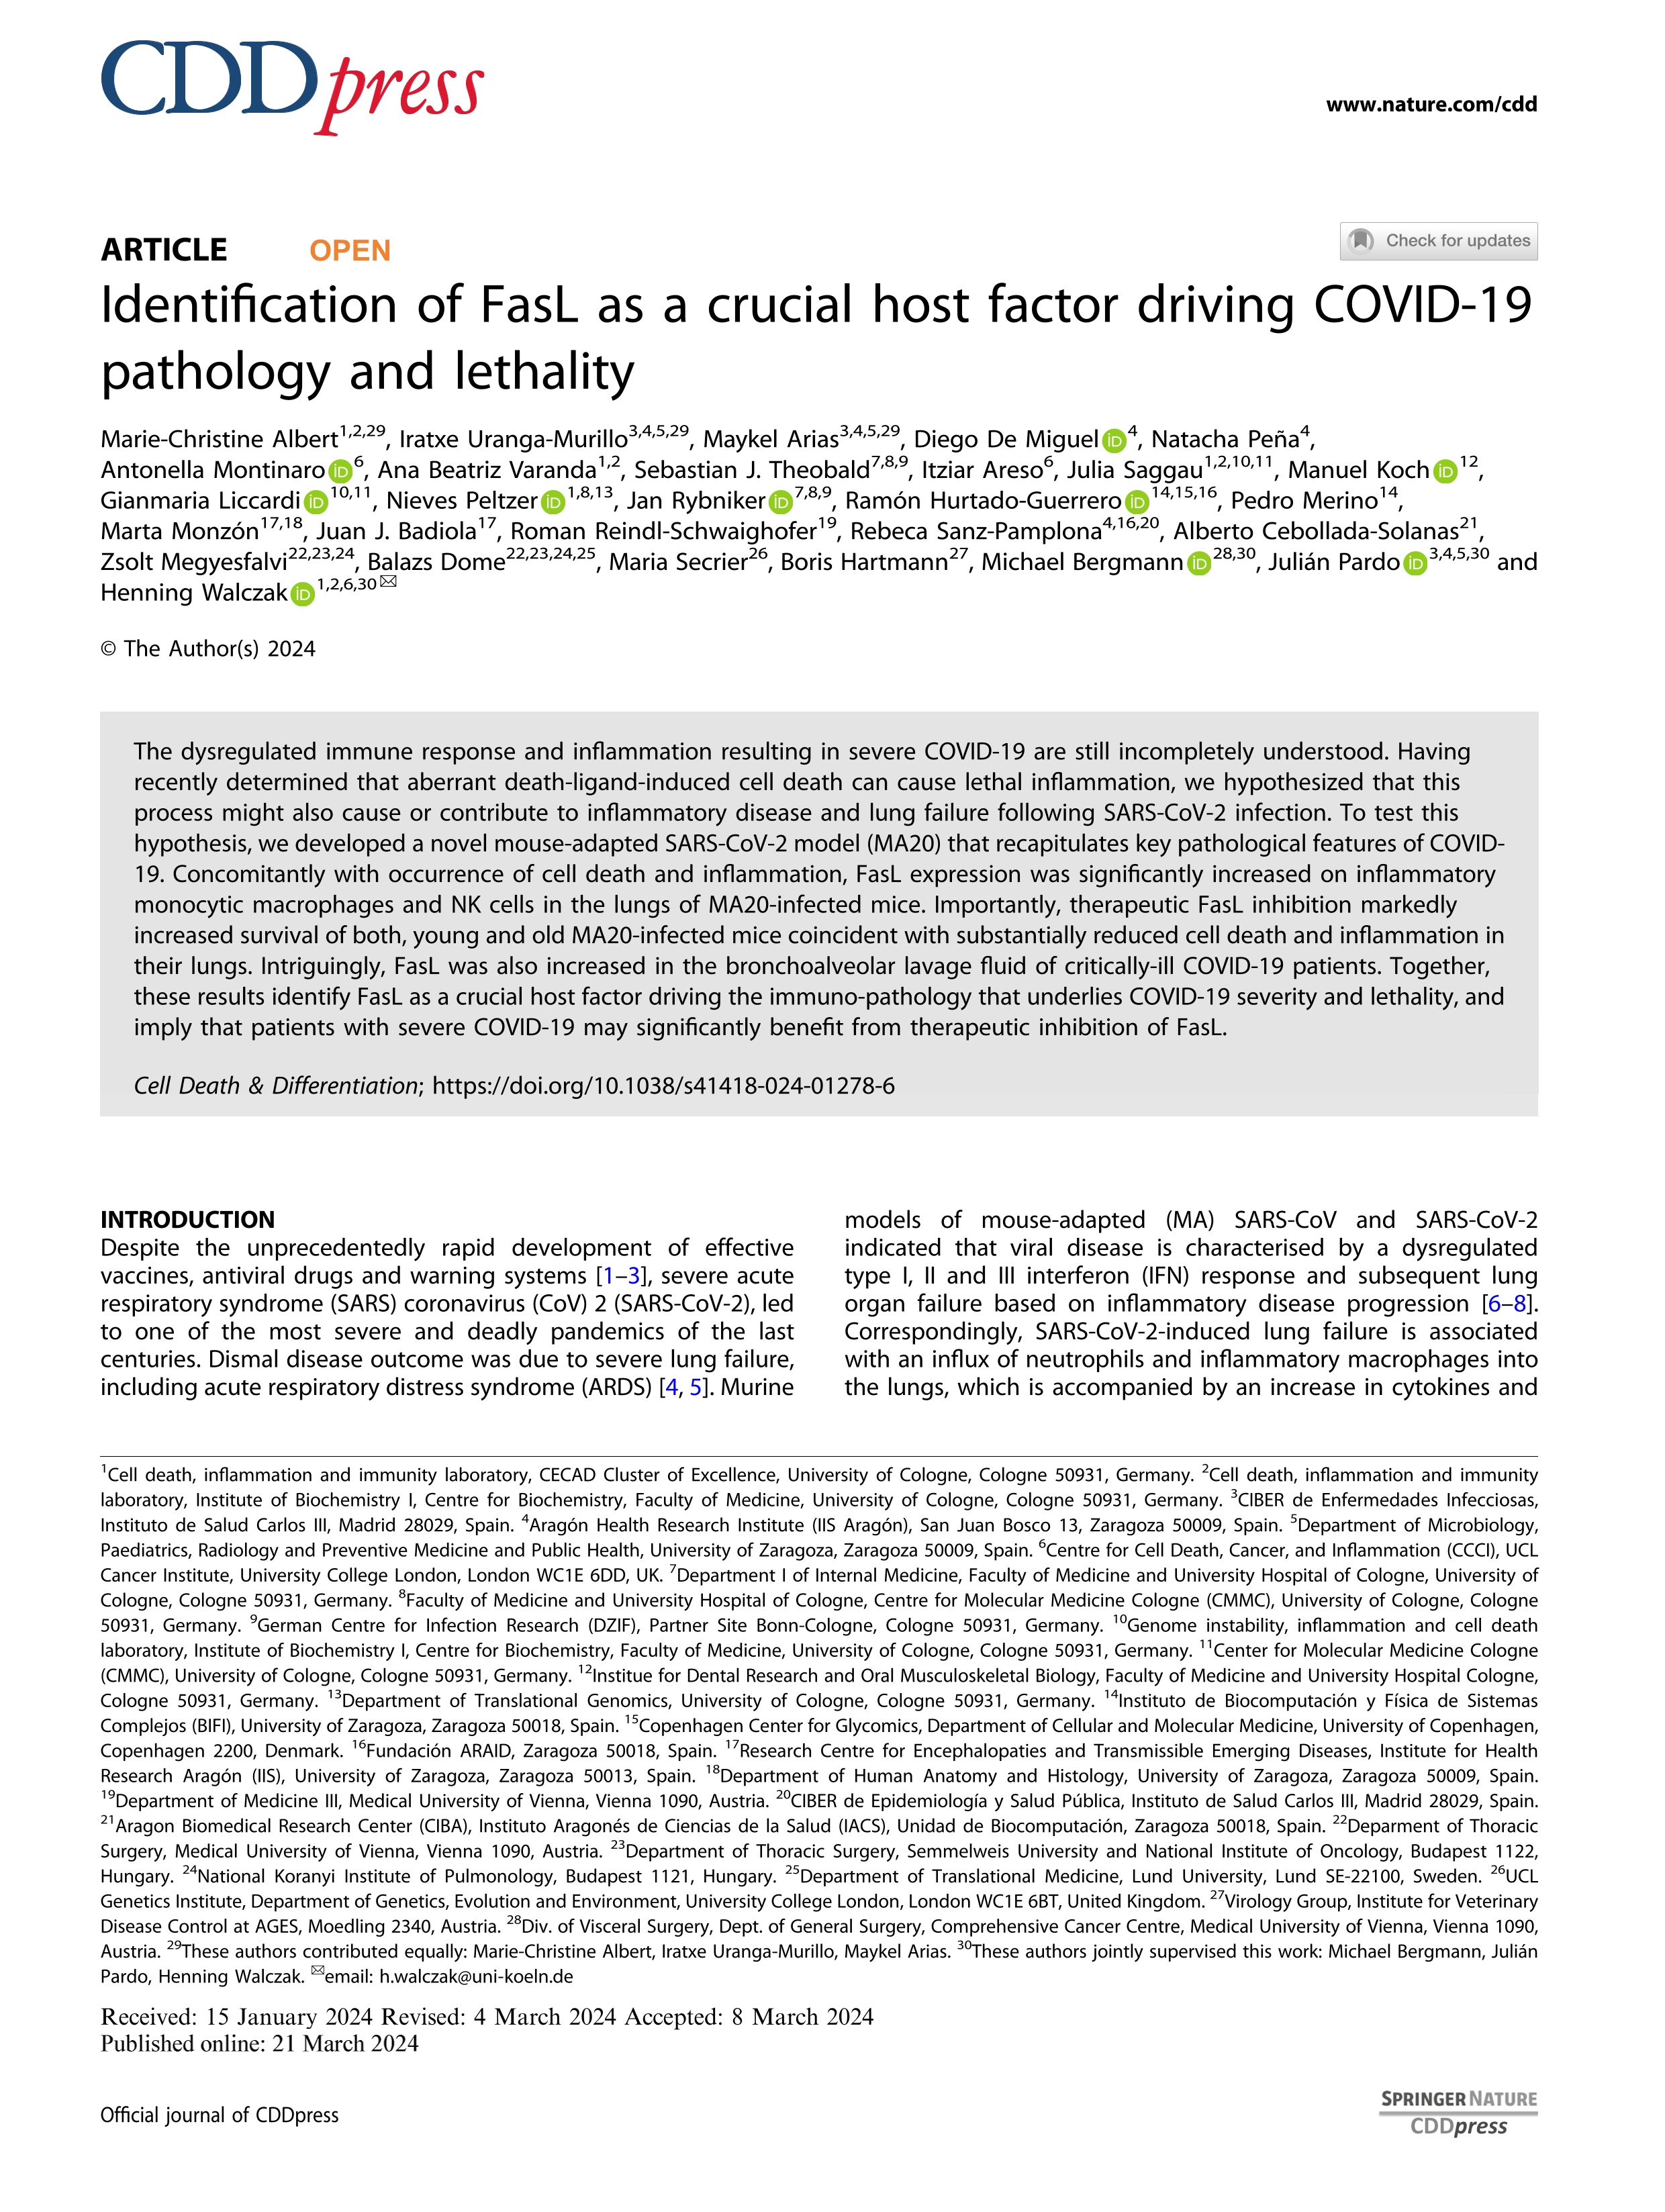 Identification of FasL as a crucial host factor driving COVID-19 pathology and lethality